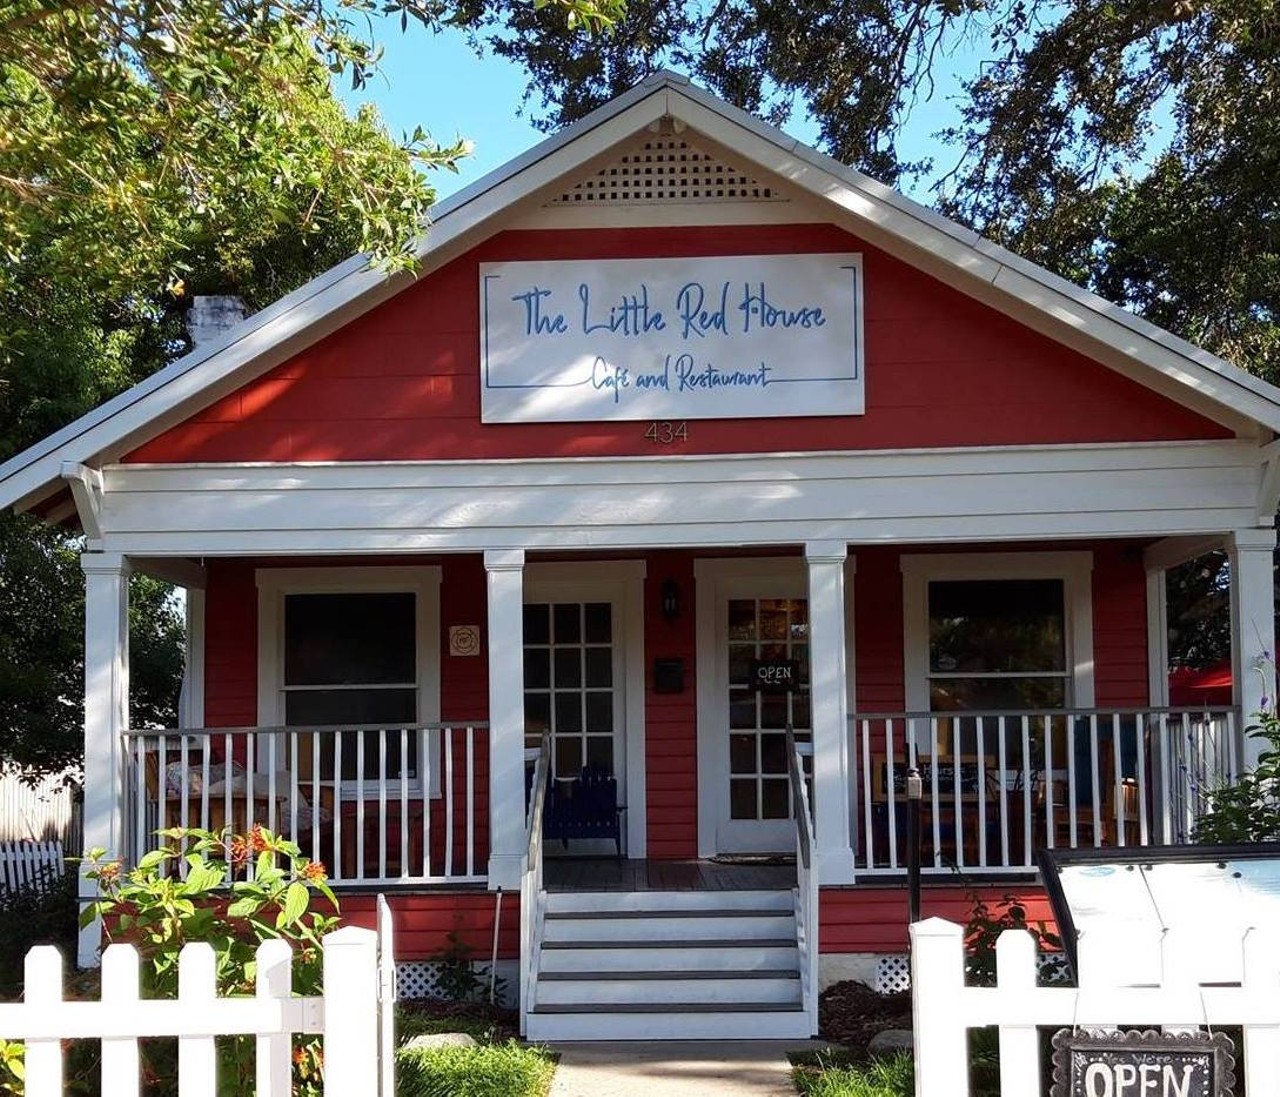  Little Red House 
434 Virginia Ln, Dunedin, FL 34698, (727) 734-0909  
You can't miss it. One of the cutest joints in town inside and out. The little French-American cafe and bakery has Sunday morning, post-hangover brunch vibes. They&#146;re also open for dinner on Friday and Saturday nights. Perfect spot to let your kids run around while you enjoy an espresso.
Photo via Little Red House/Facebook